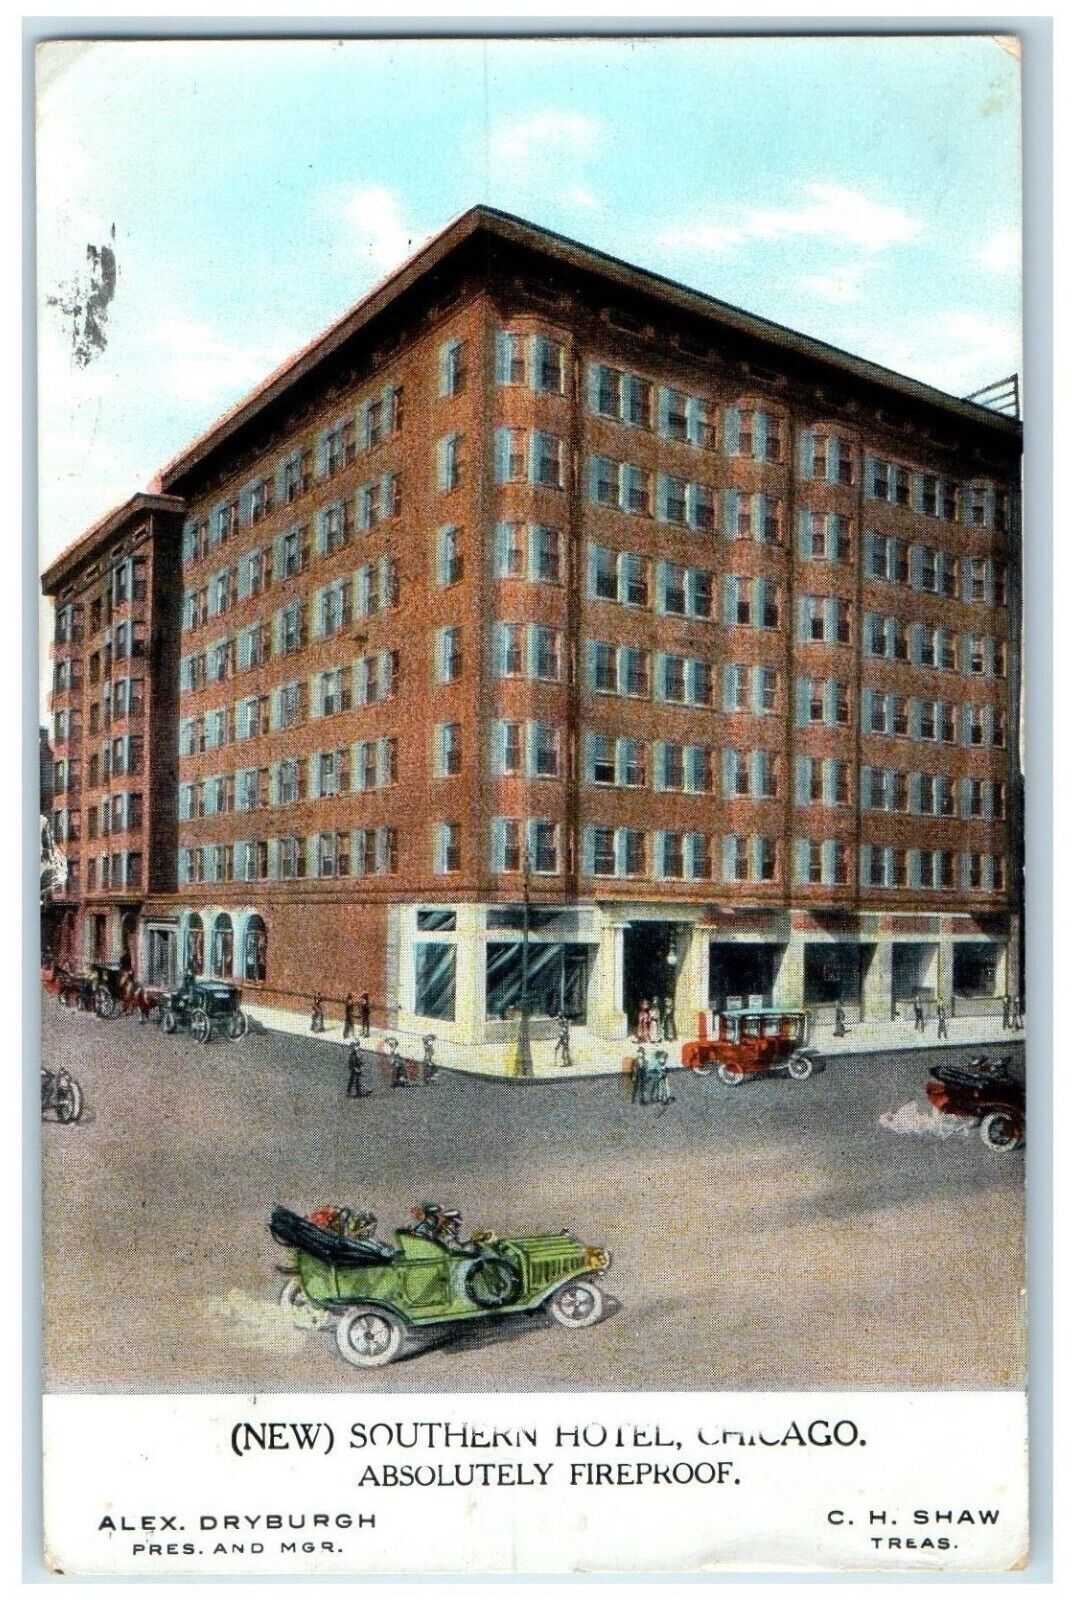 1910 New Southern Hotel Fireproof Alex Dryburgh Street Chicago Illinois Postcard